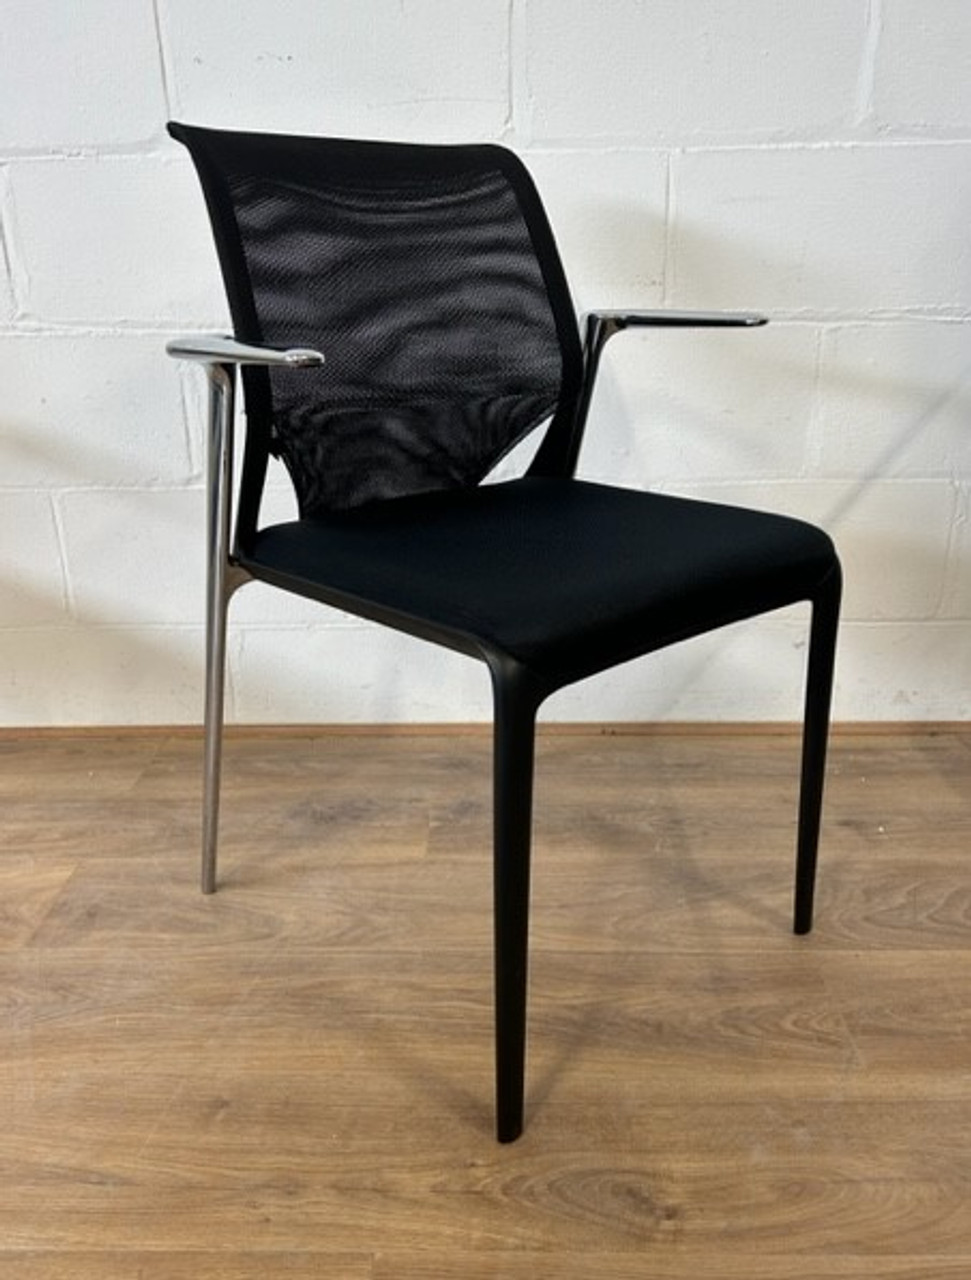 Used office furniture chelmsford_used vitra medaslim chairs